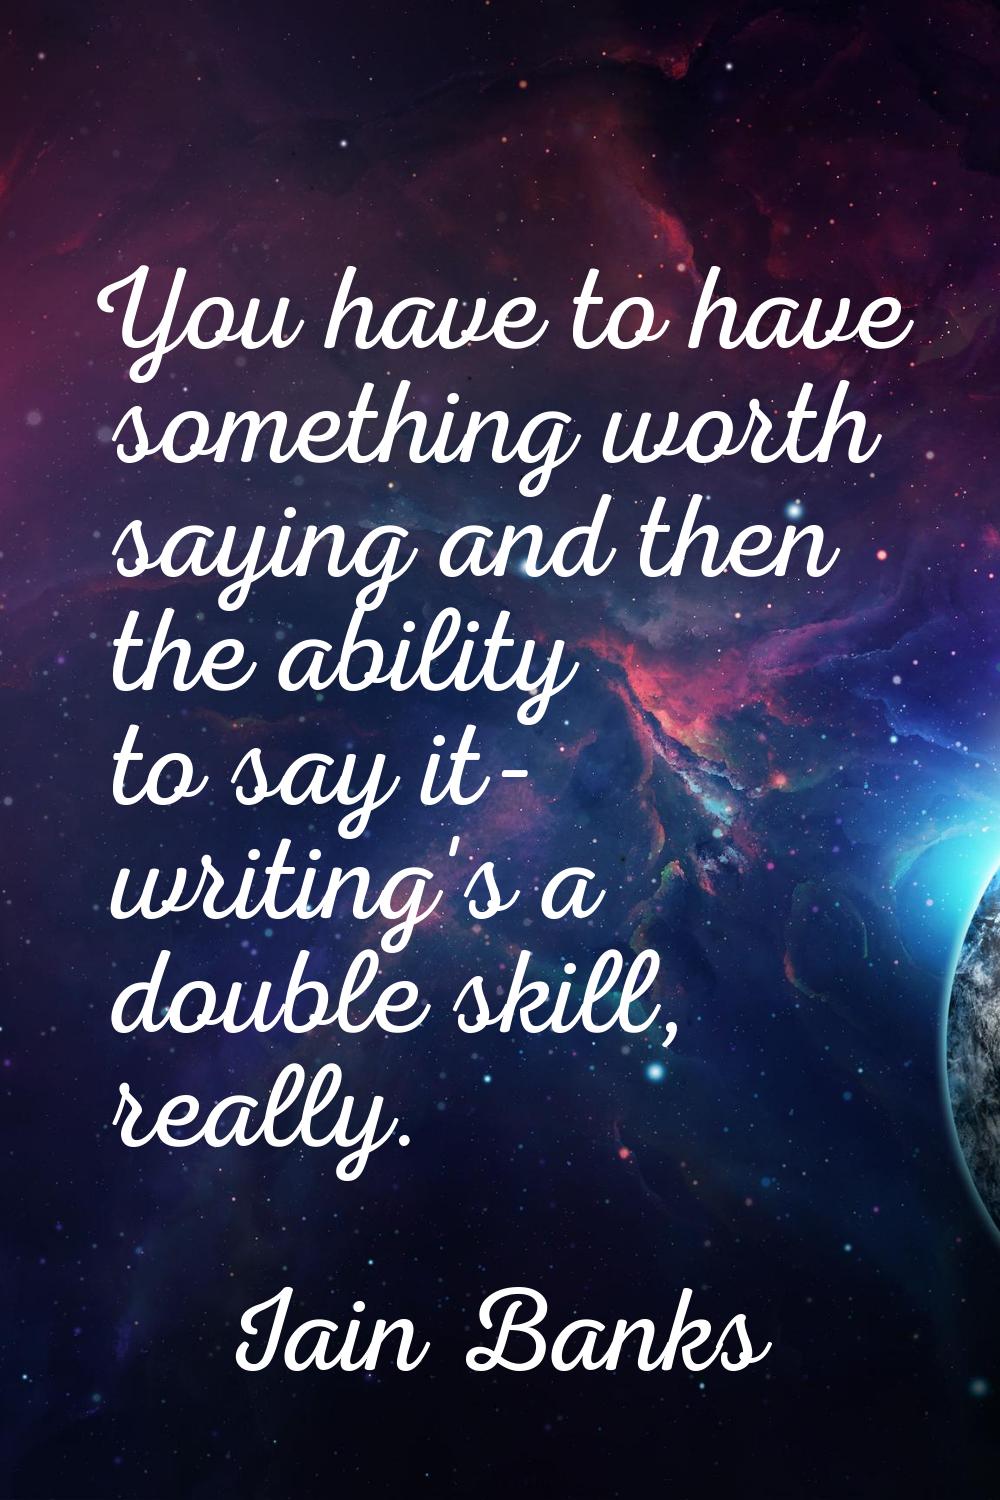 You have to have something worth saying and then the ability to say it- writing's a double skill, r